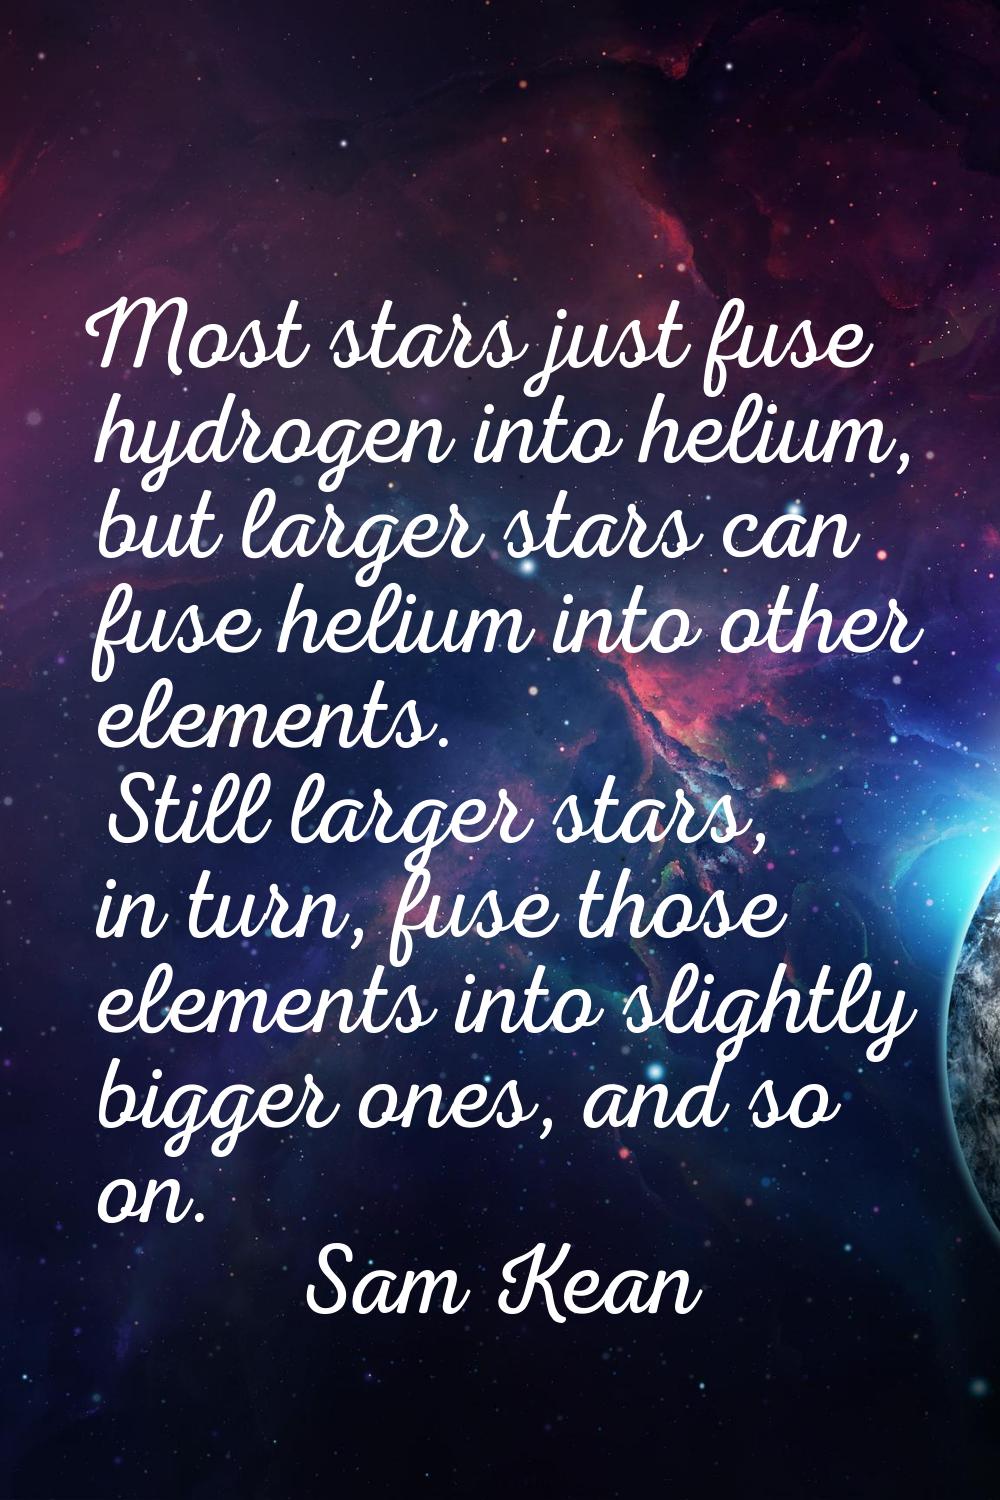 Most stars just fuse hydrogen into helium, but larger stars can fuse helium into other elements. St